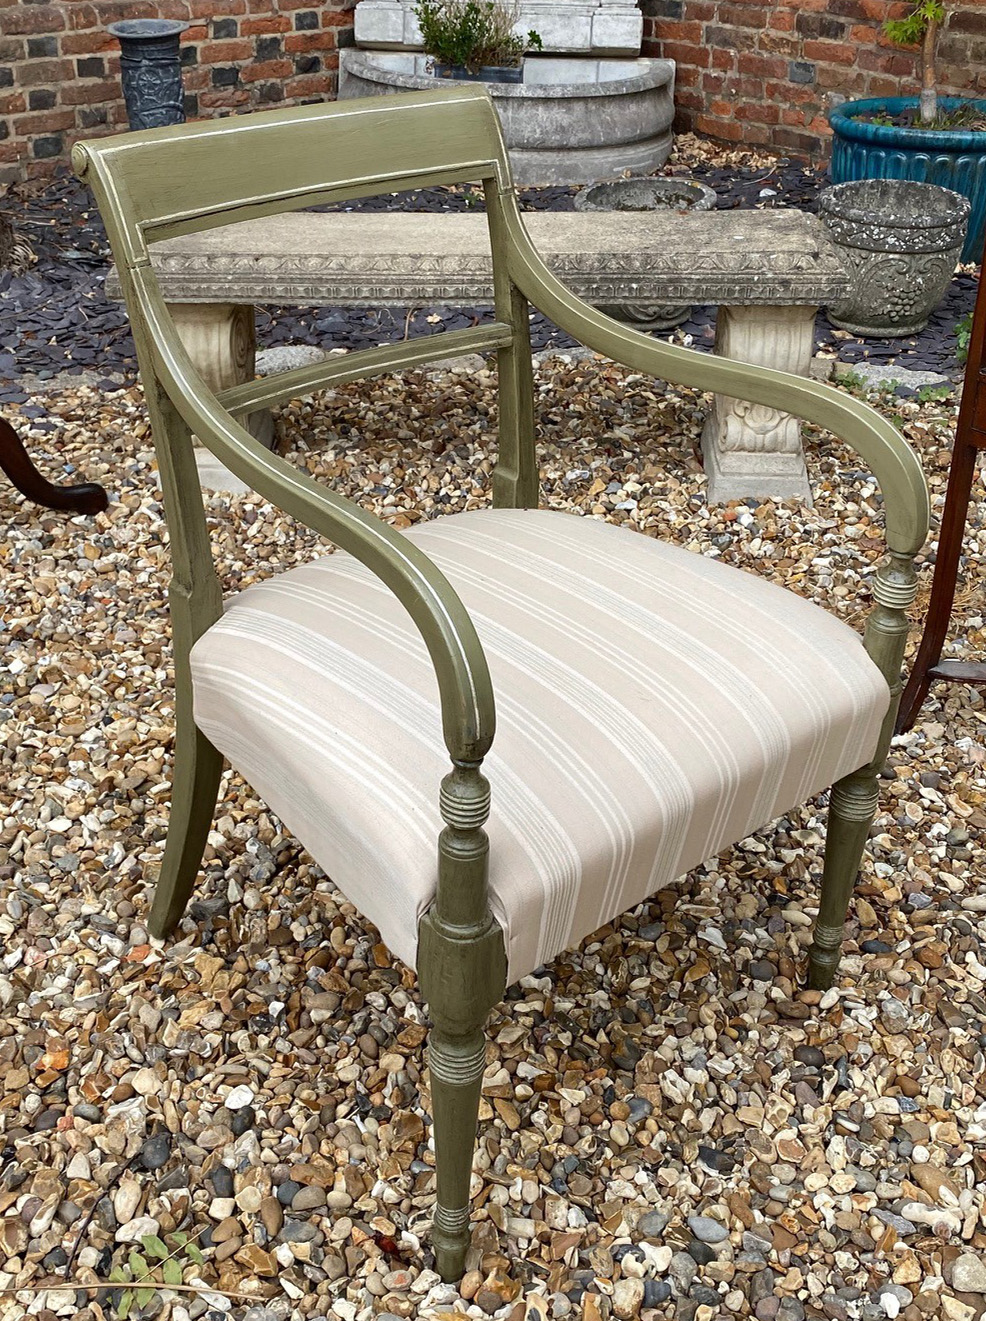 A GEORGIAN FRENCH GREY PAINTED OPEN ARMCHAIR With fabric upholstered seat. (51cm x 52cm x 80cm)